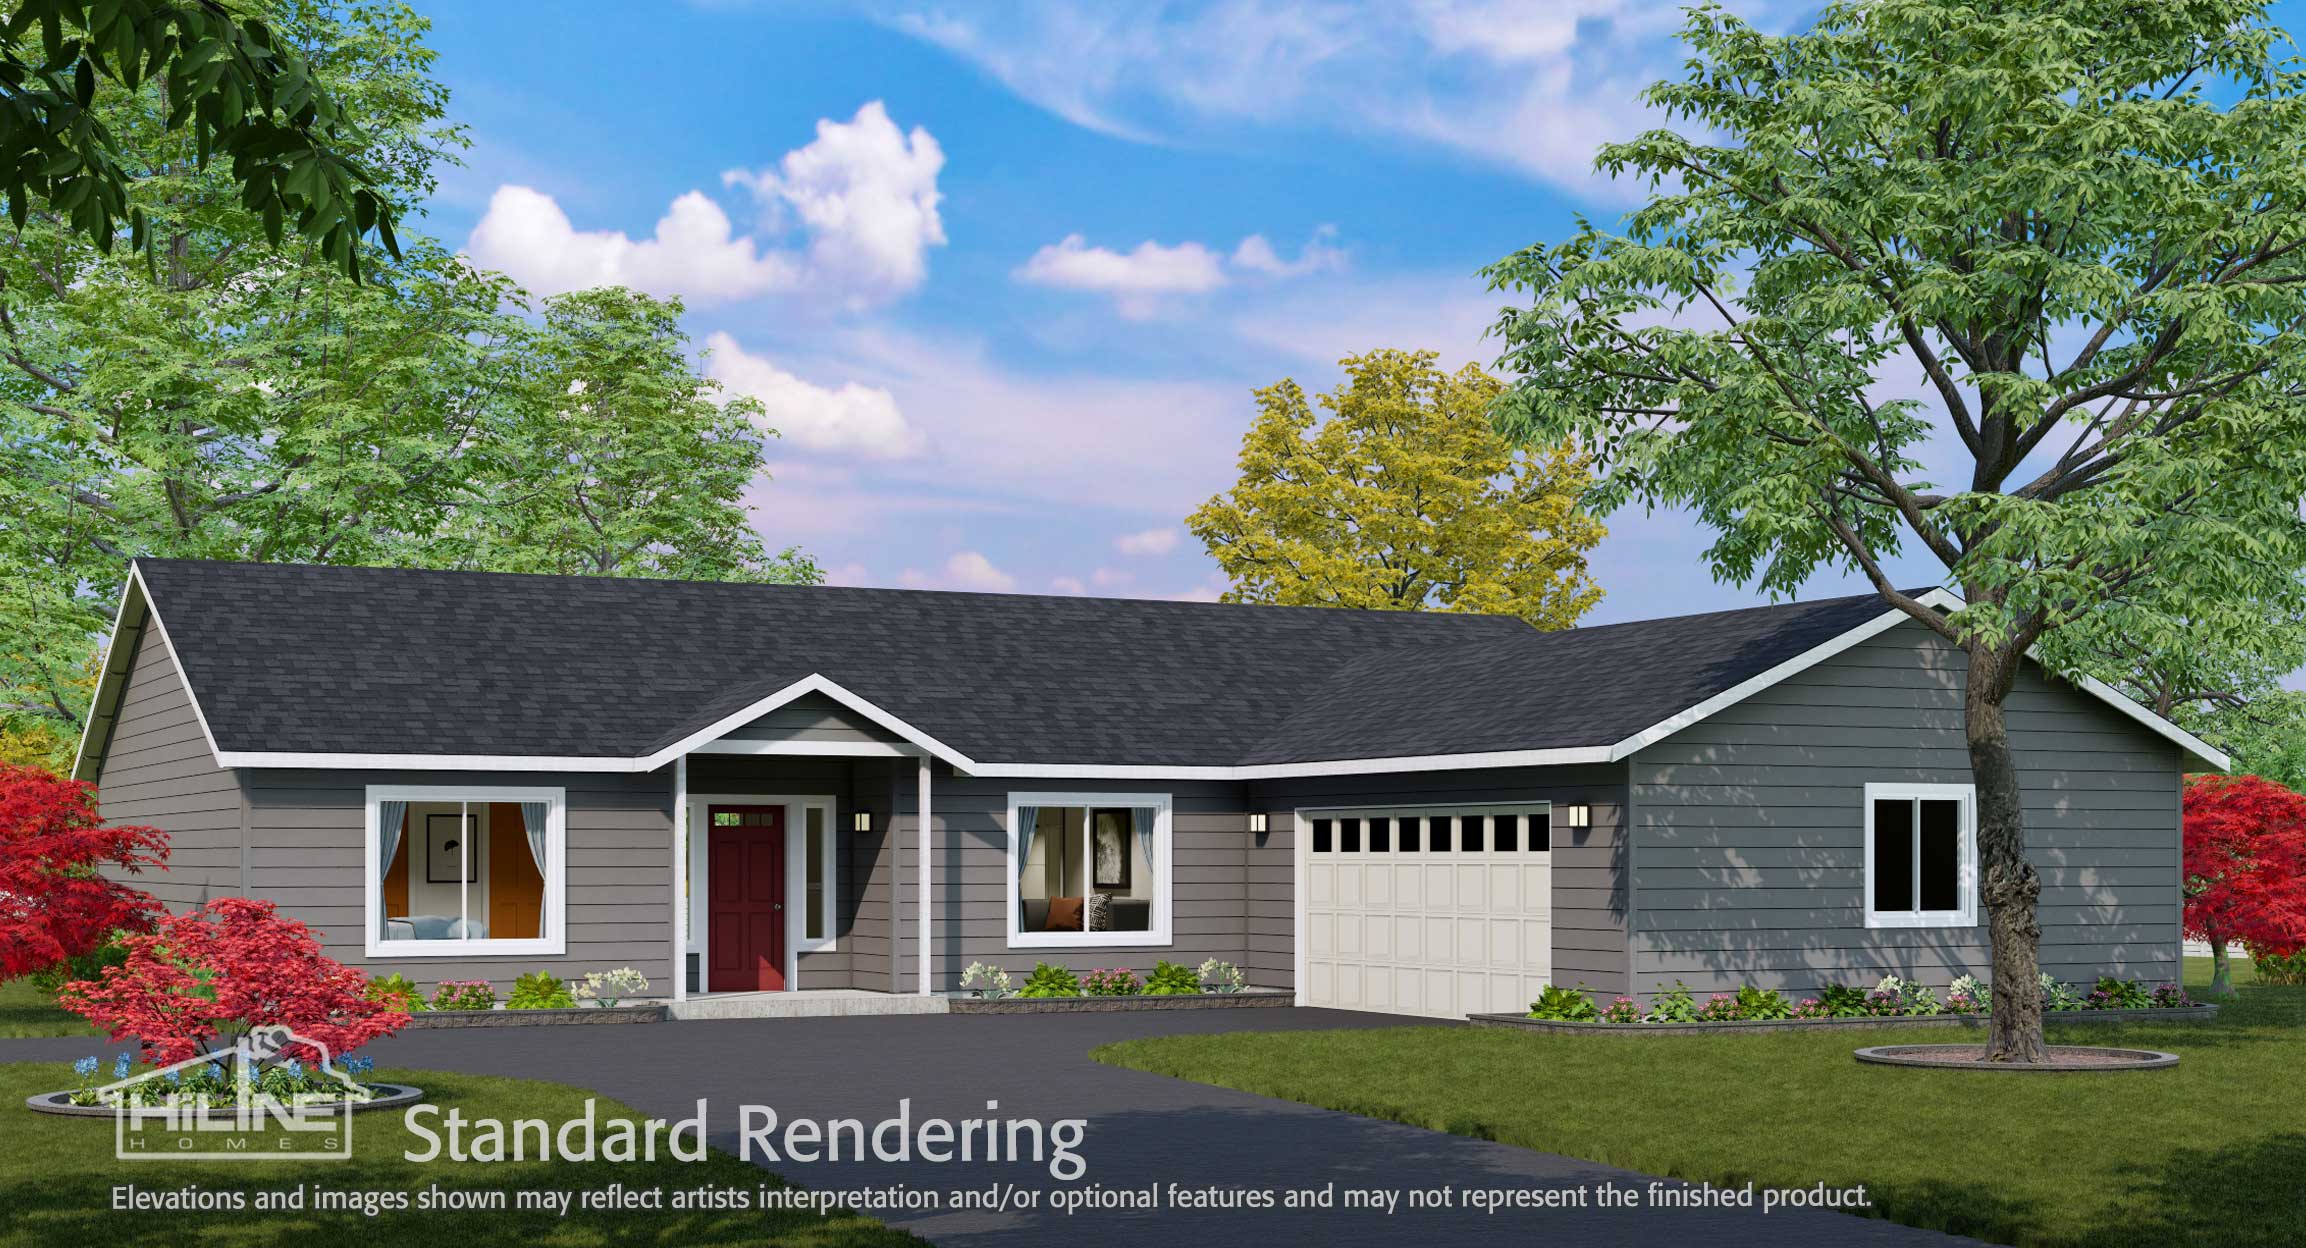 Image of Home Plan 1940A Standard Rendering.